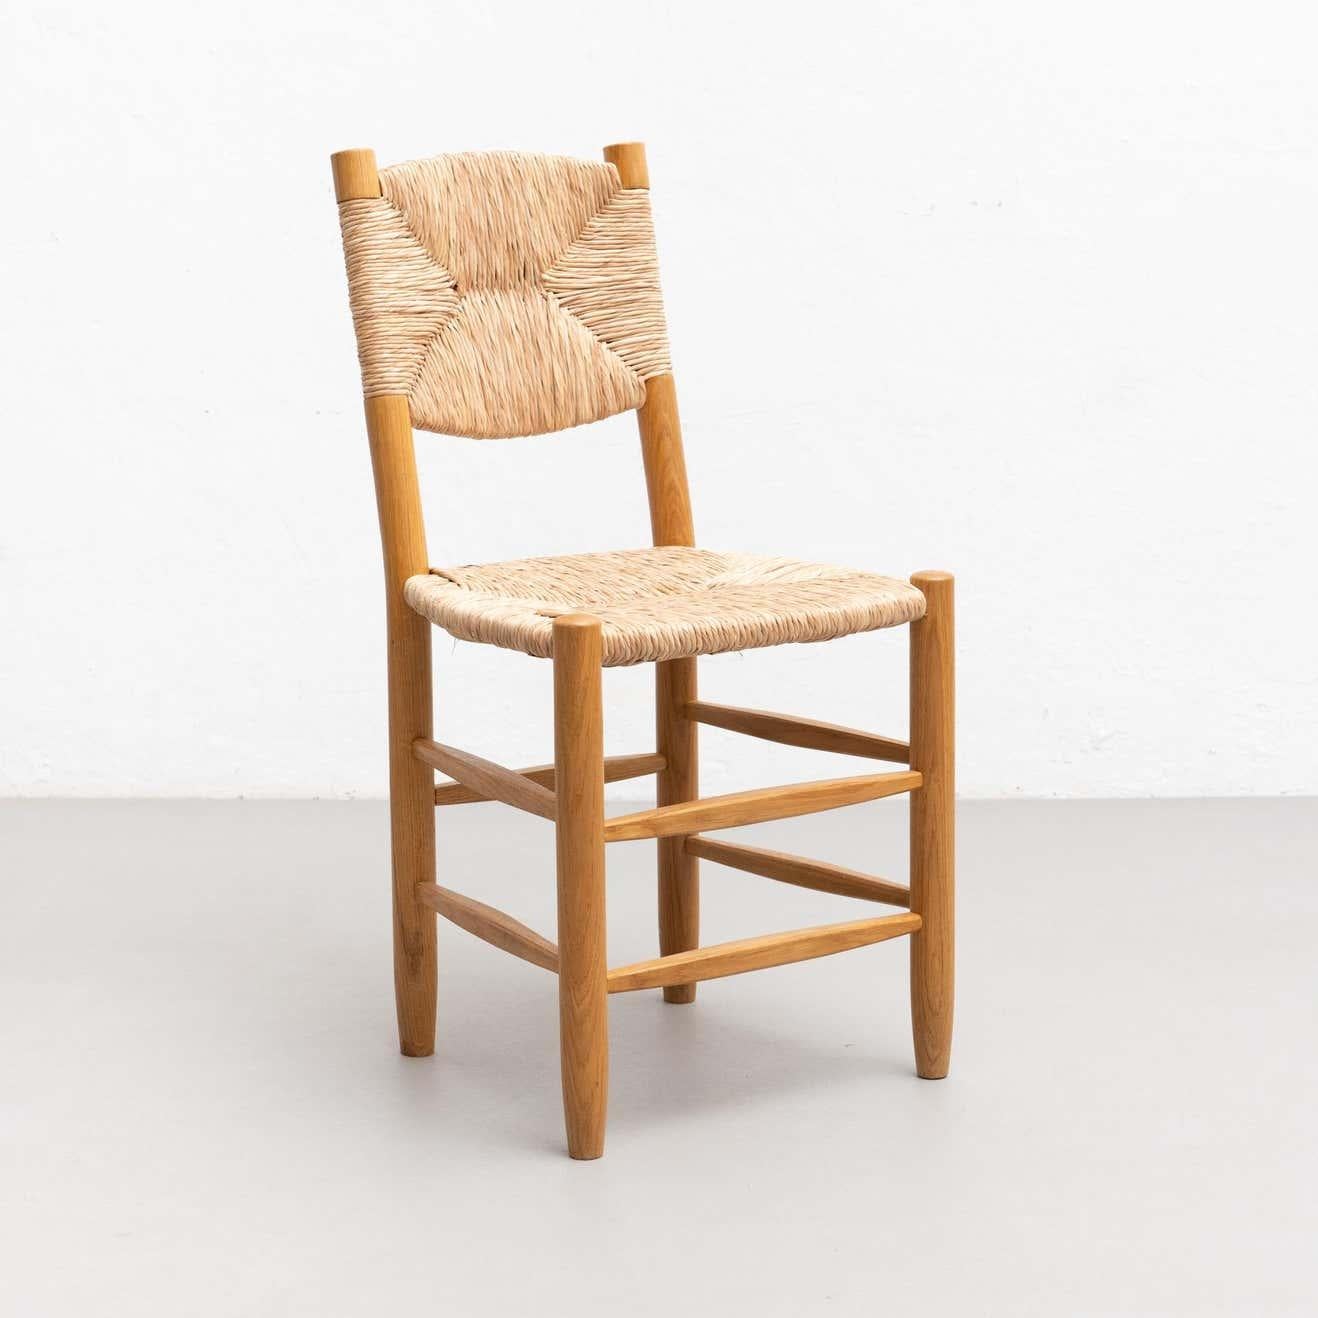 Chair designed in the style of Charlotte Perriand, made by unknown manufacturer, circa 1980.

Wood and rattan.

In good original condition, with minor wear consistent with age and use, preserving a beautiful patina.